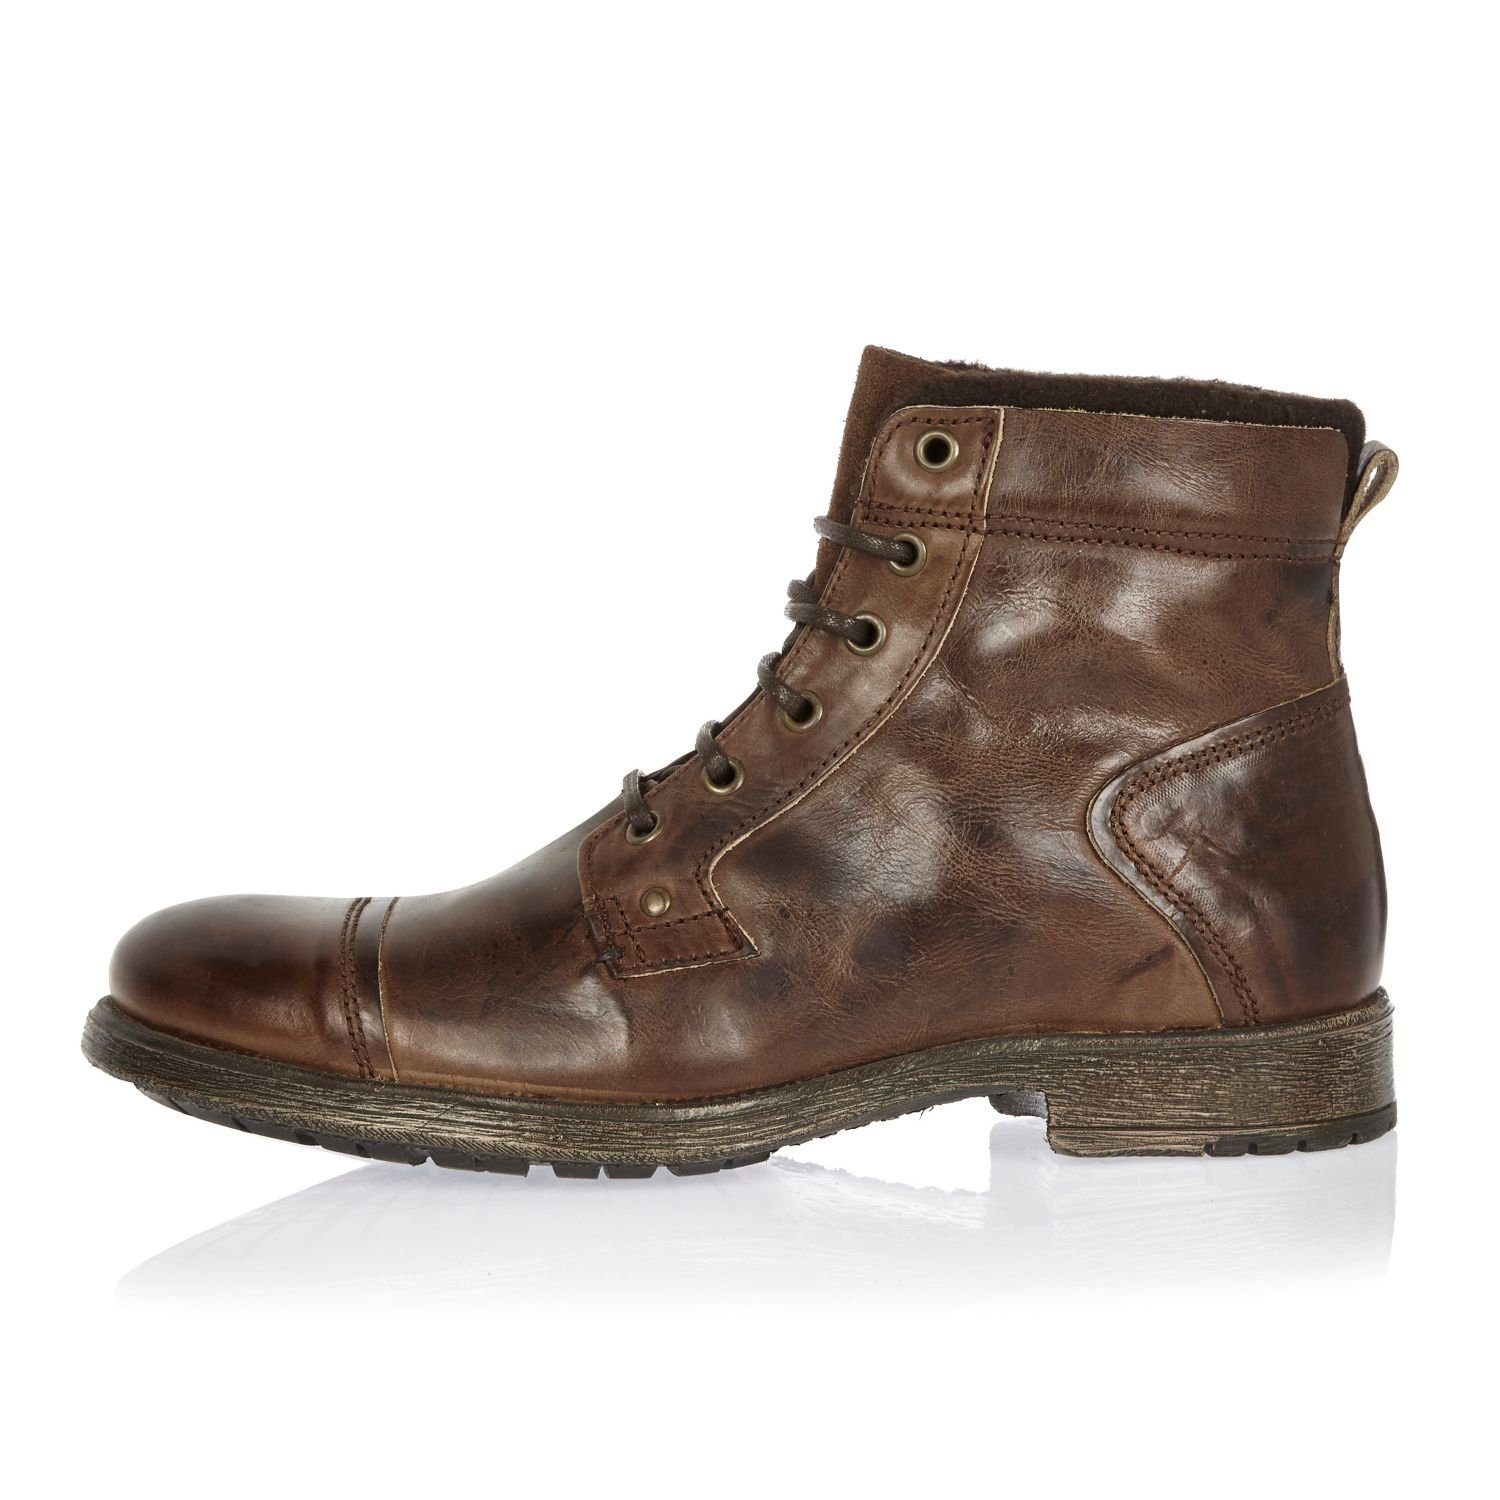 River Island Dark Brown Leather Utility Boots in Brown for Men - Lyst